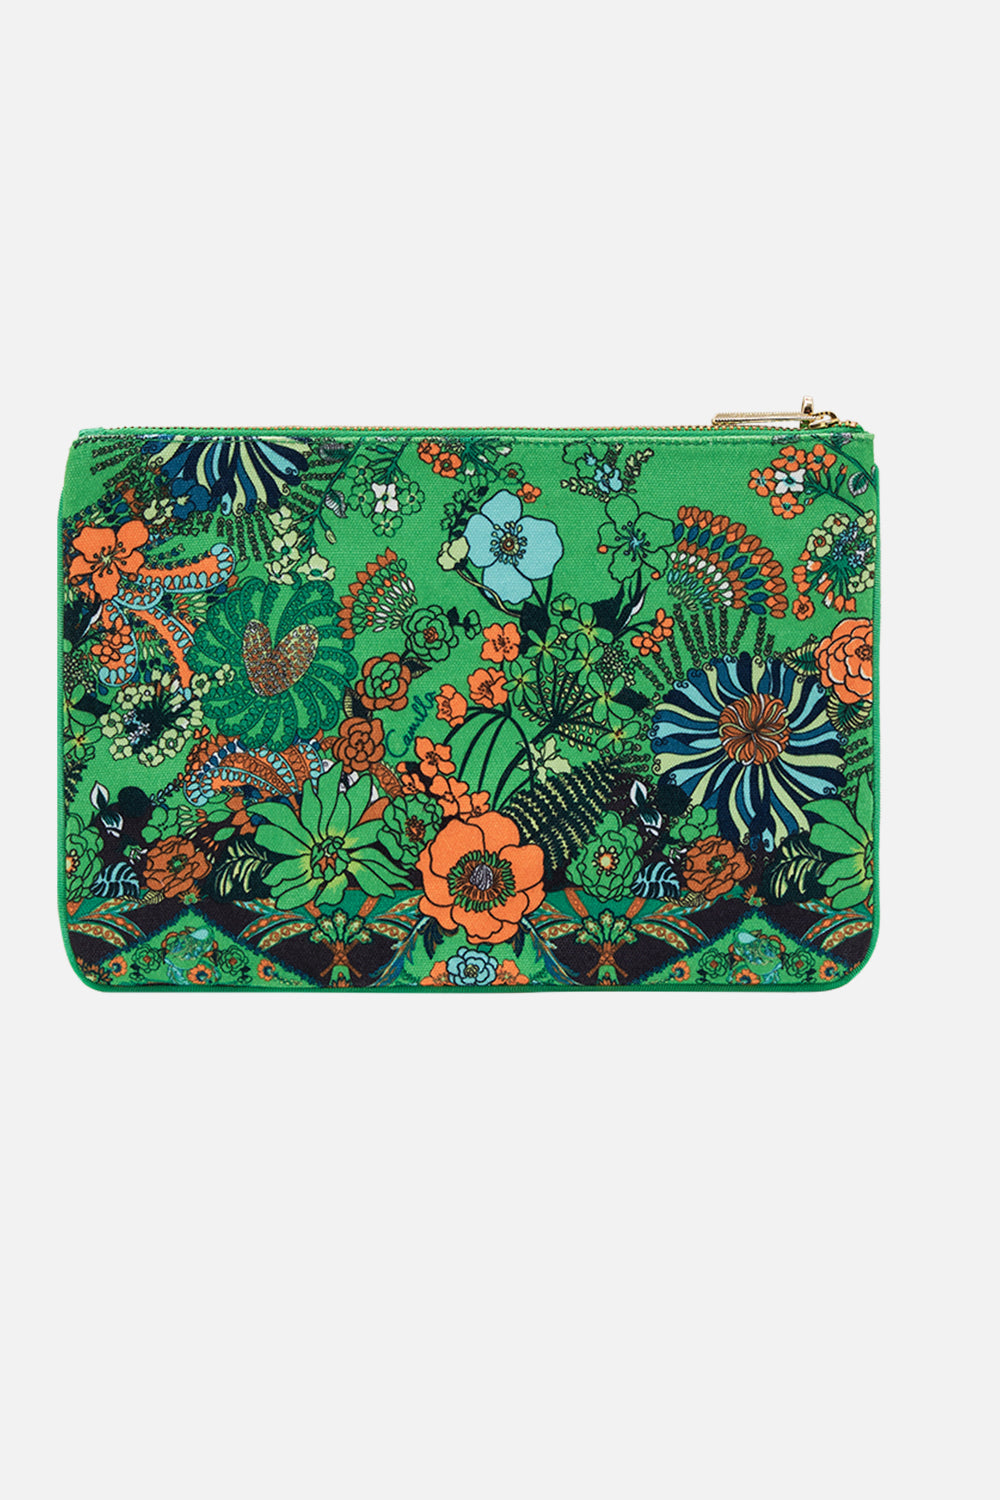 CAMILLA green small canvas clutch in Good Vibes Generation